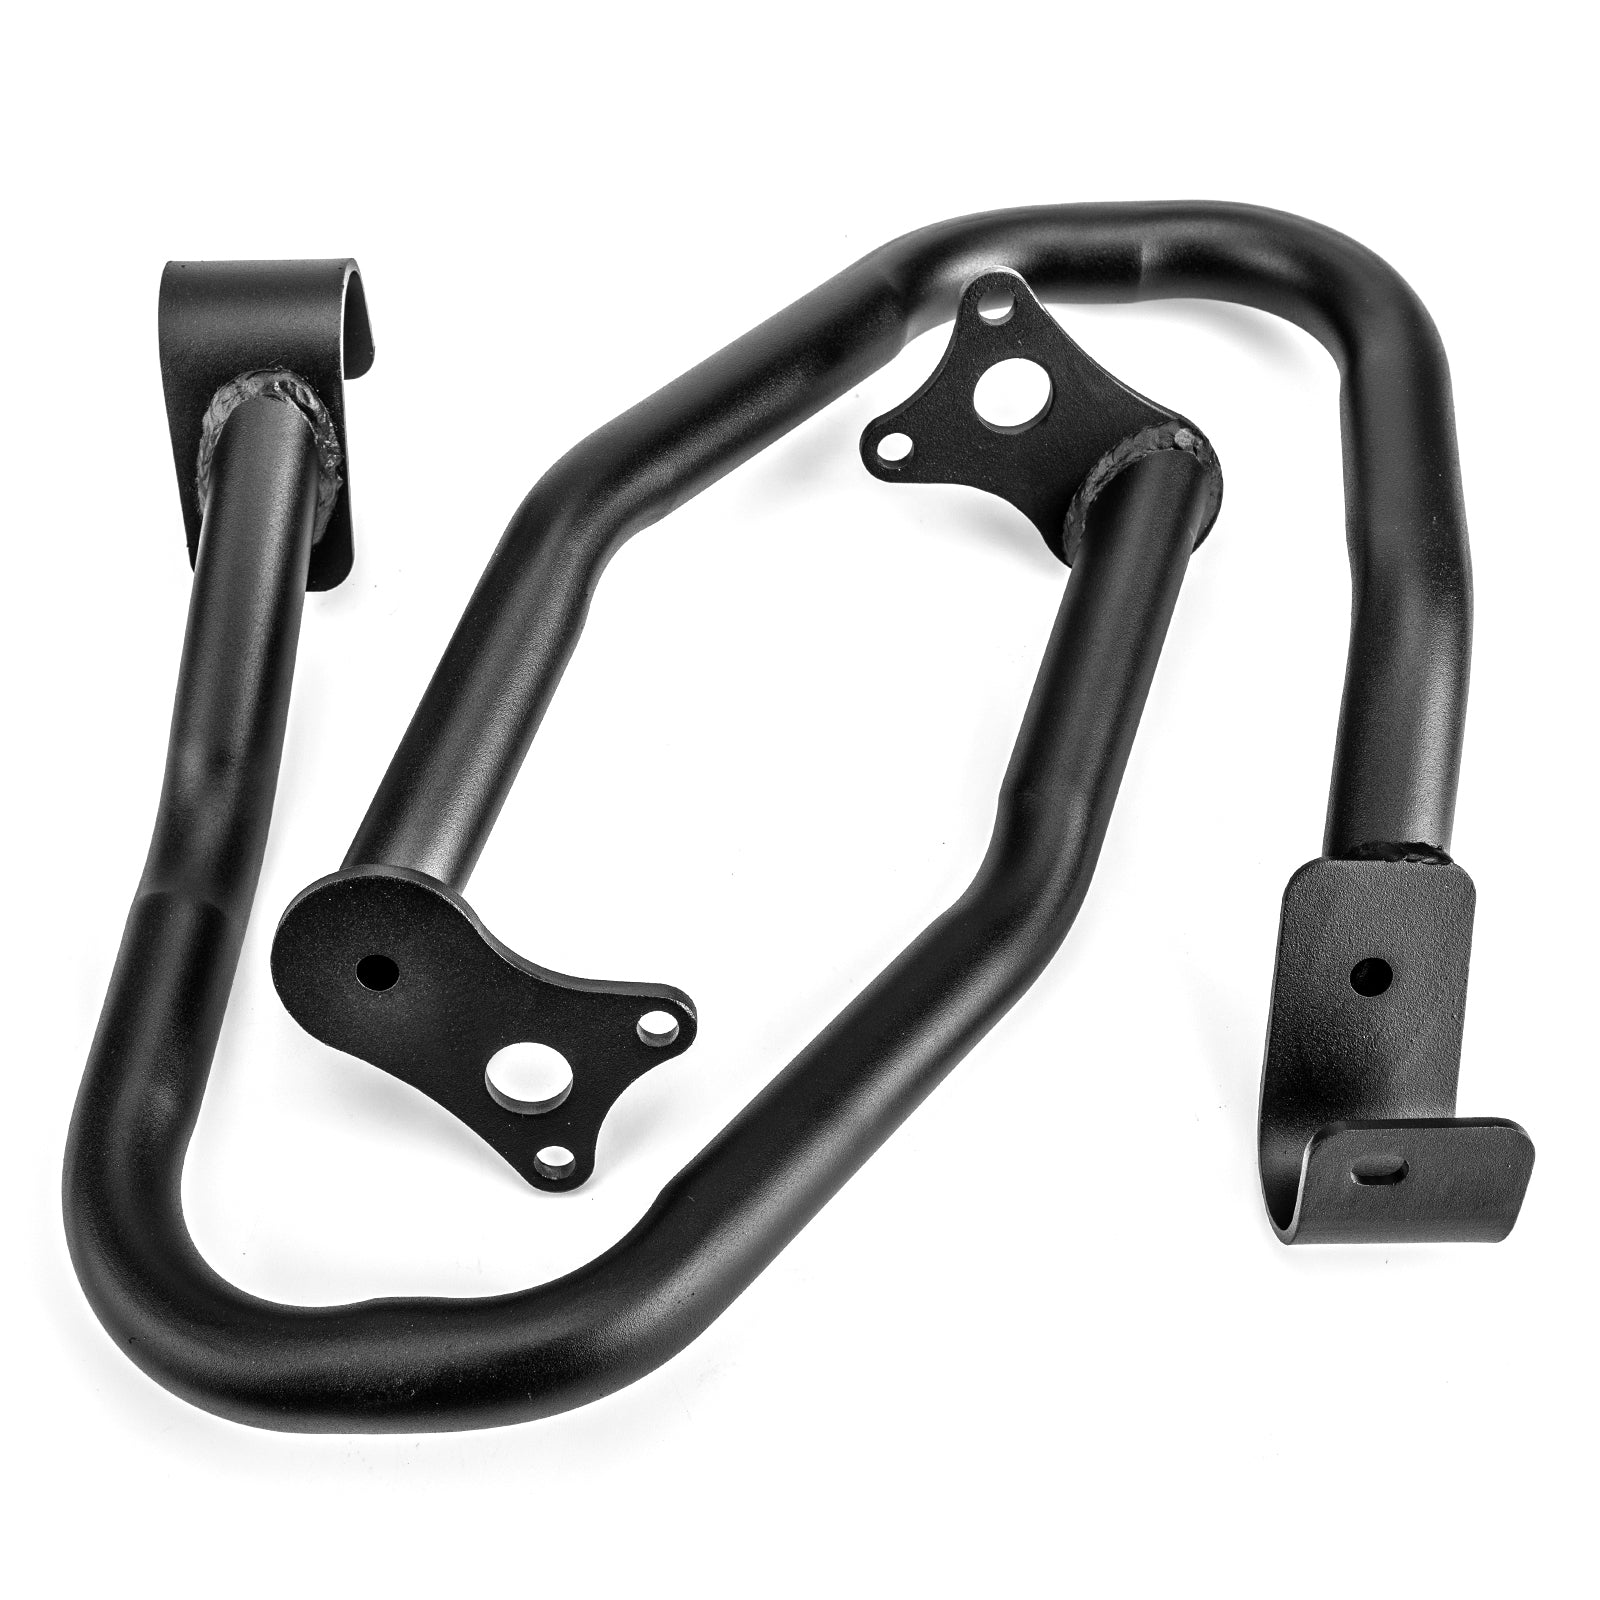 New For Indian Scout 2015-2018 Reliable Engine Guard Highway Crash Bars Black